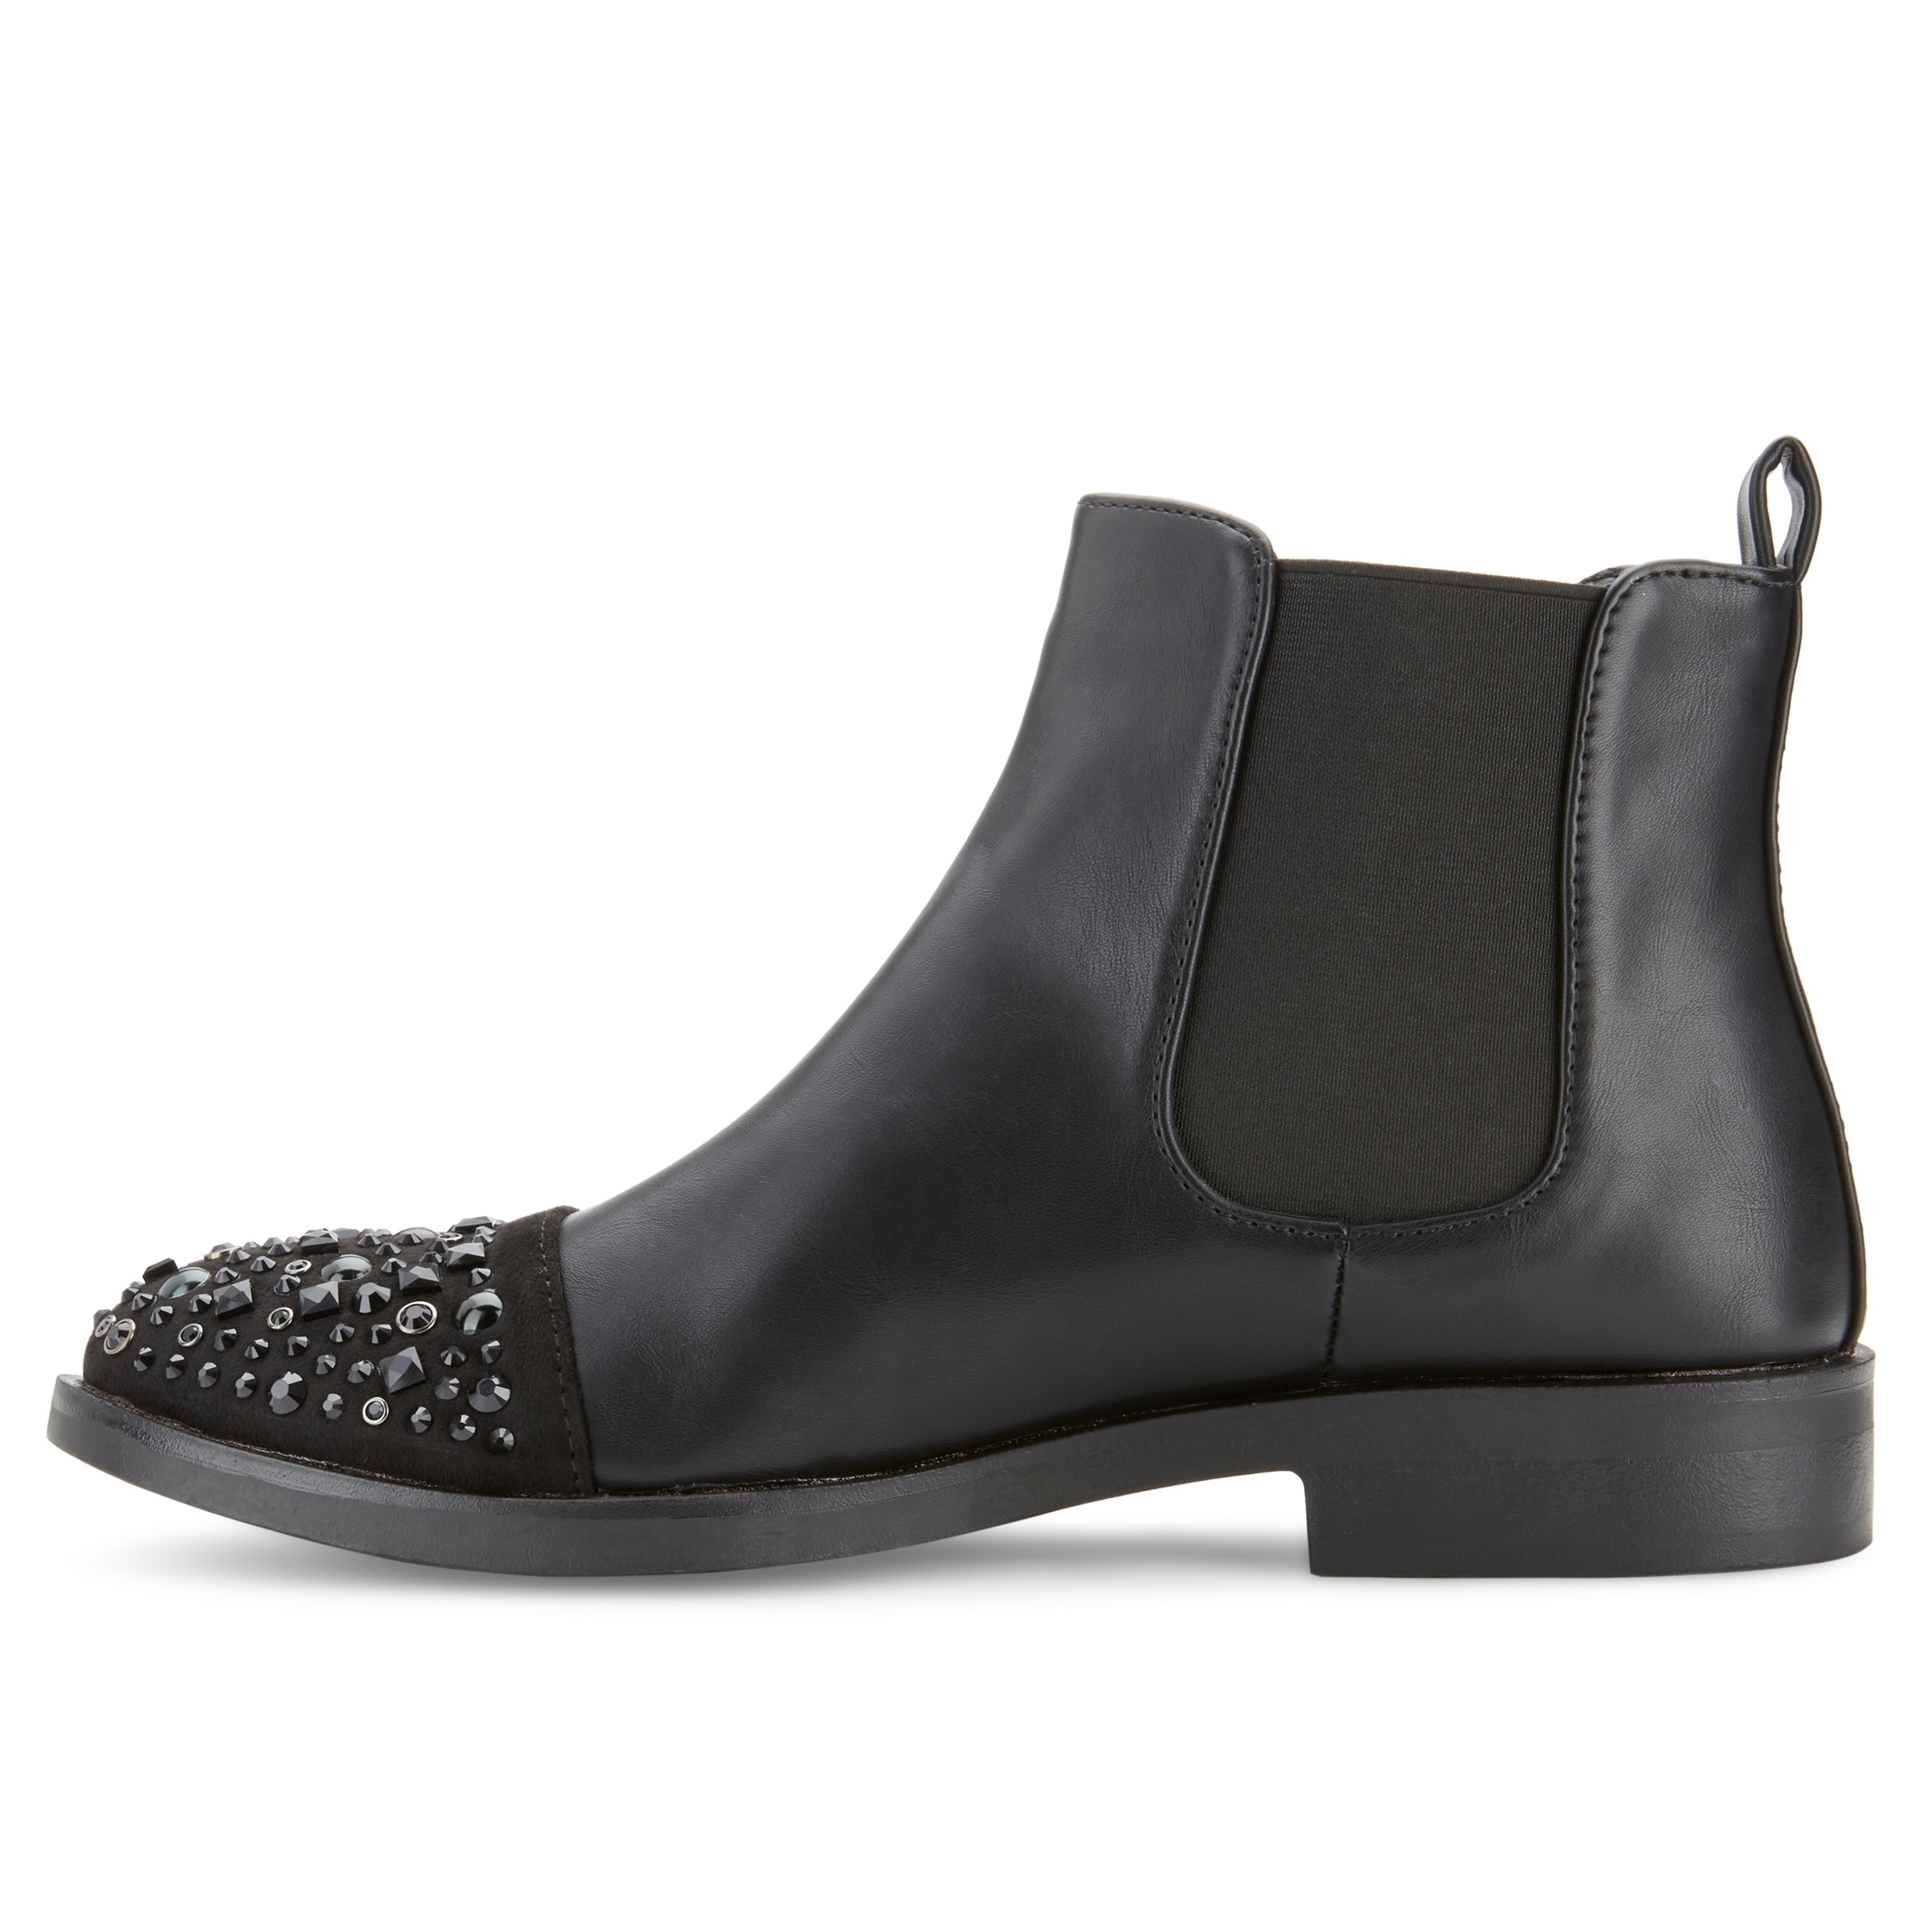 studded toe chelsea boots